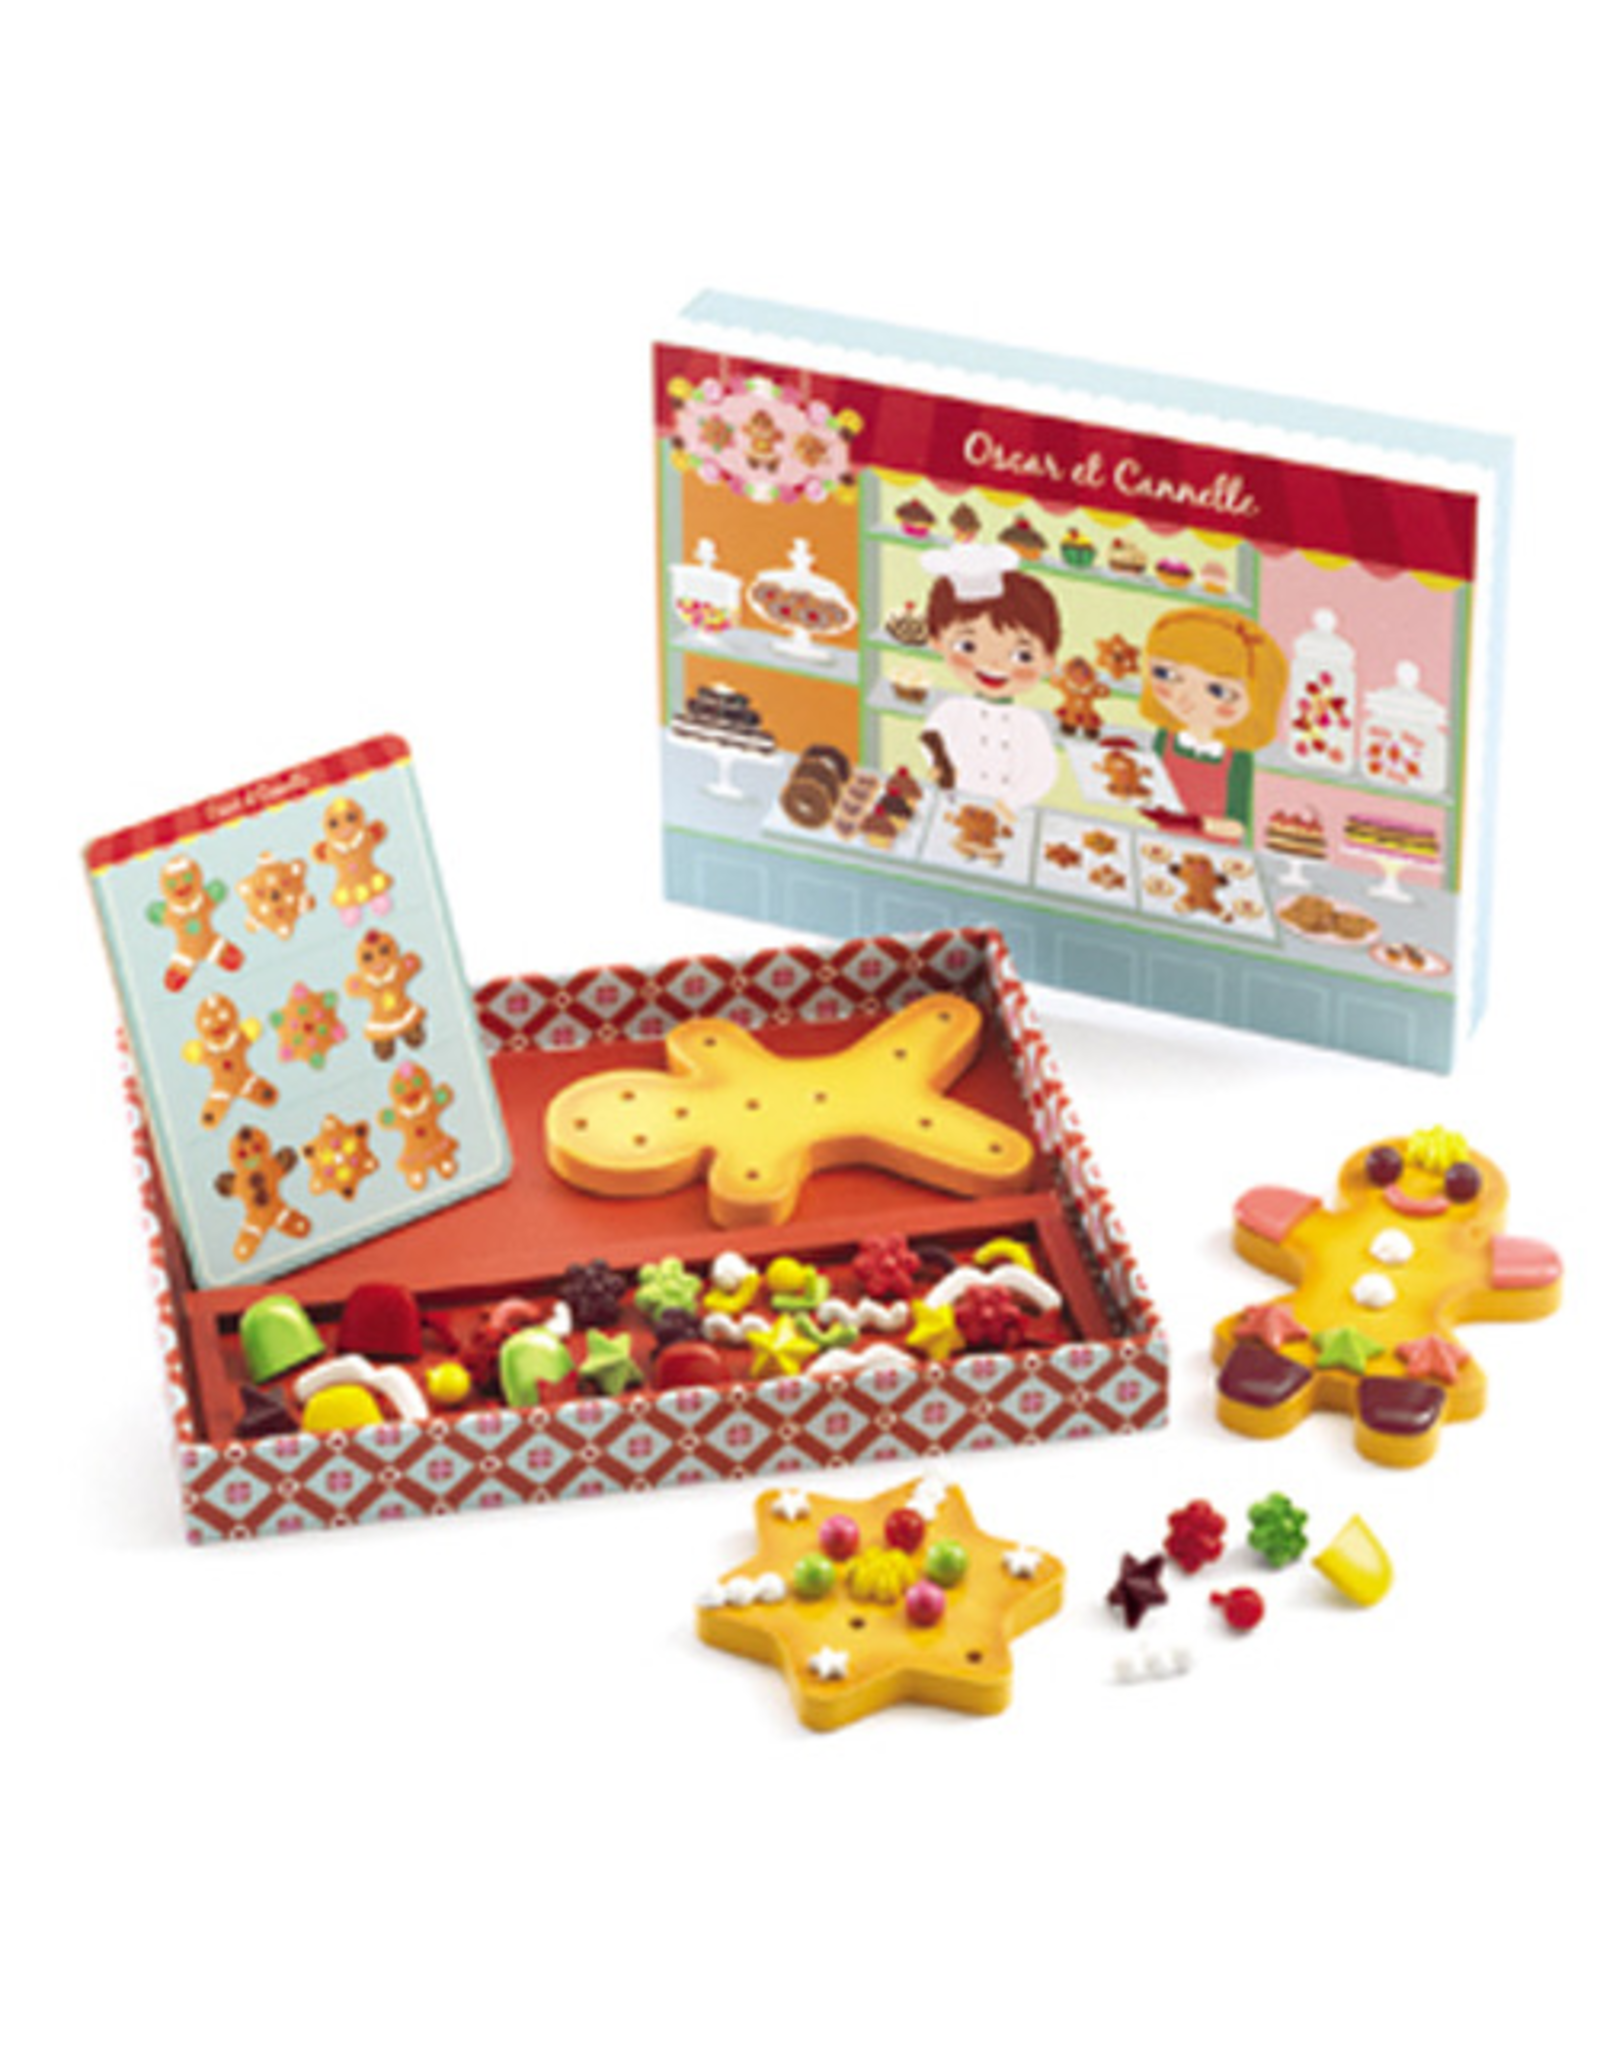 Djeco Oscar & Cannelle Gingerbread Cookie Set